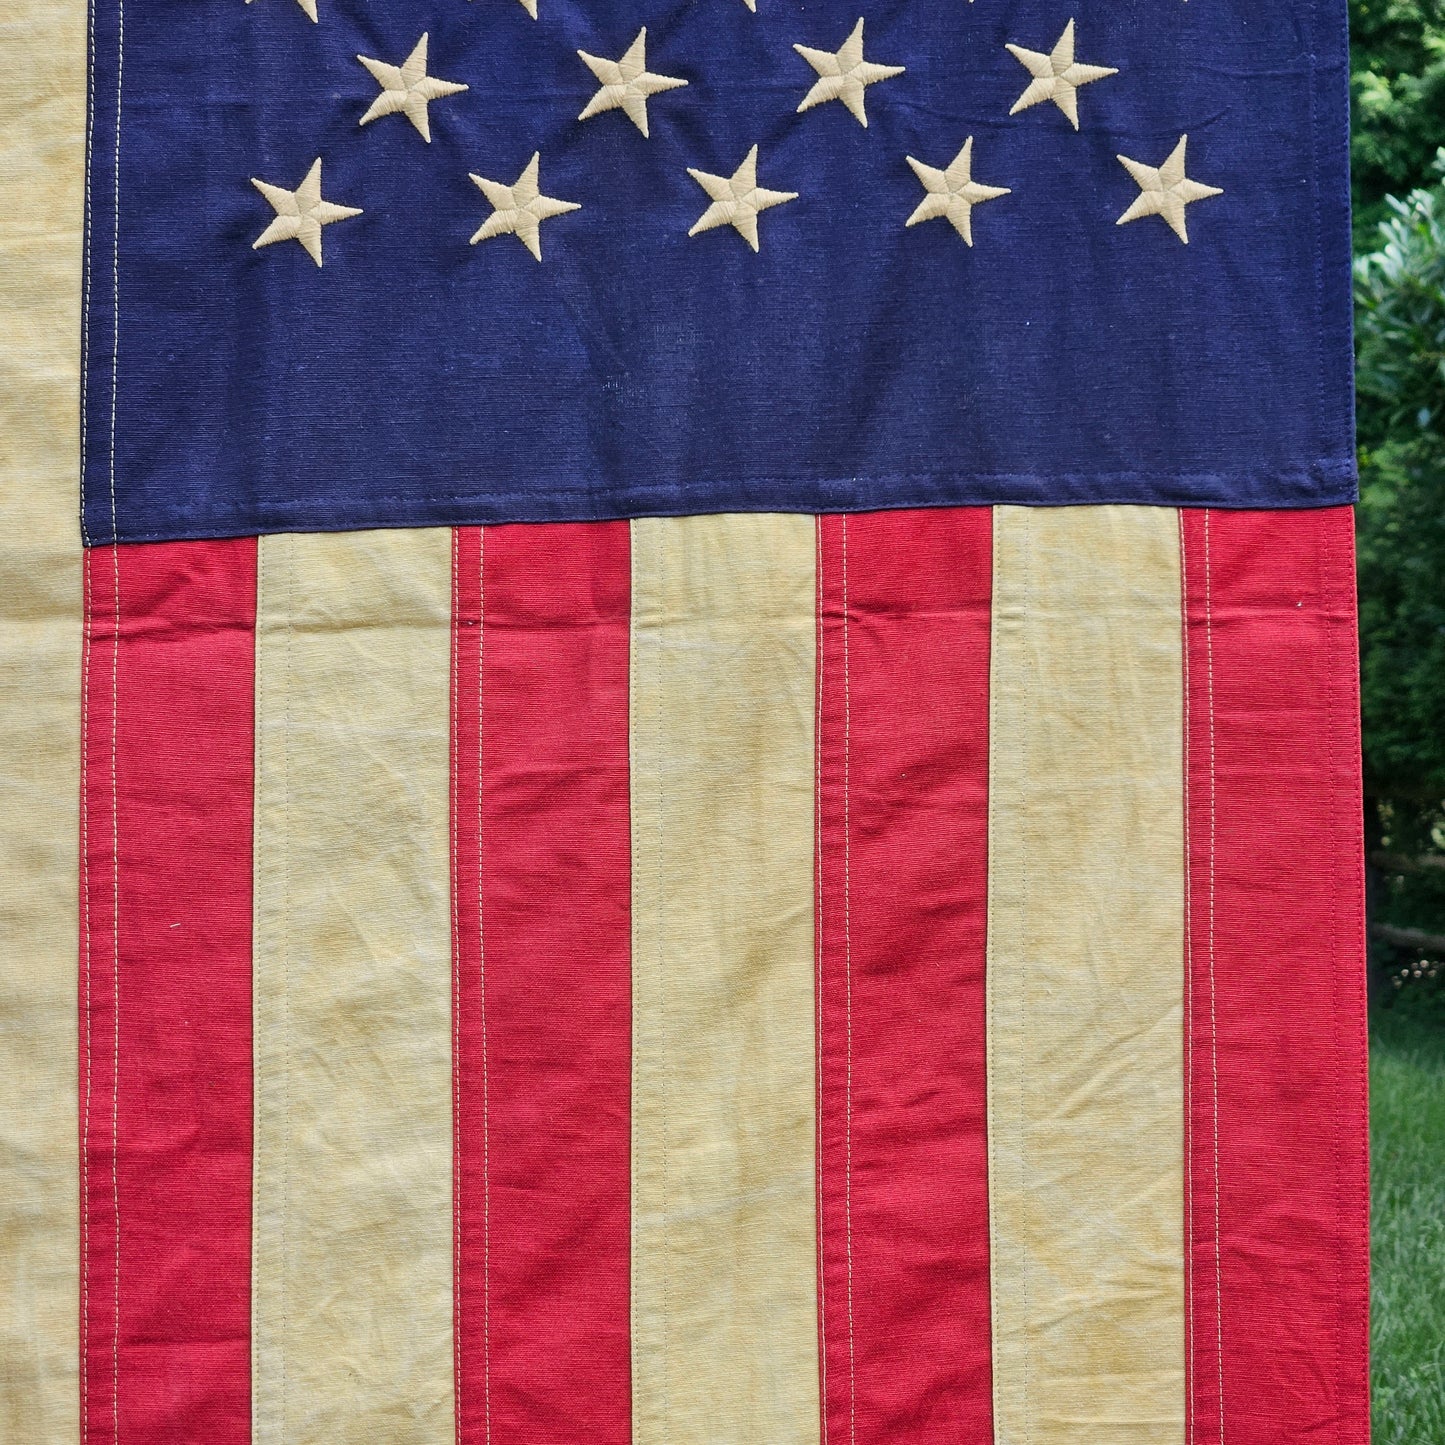 Large 50 Tea-Stained Star American Flag 32" x 58"